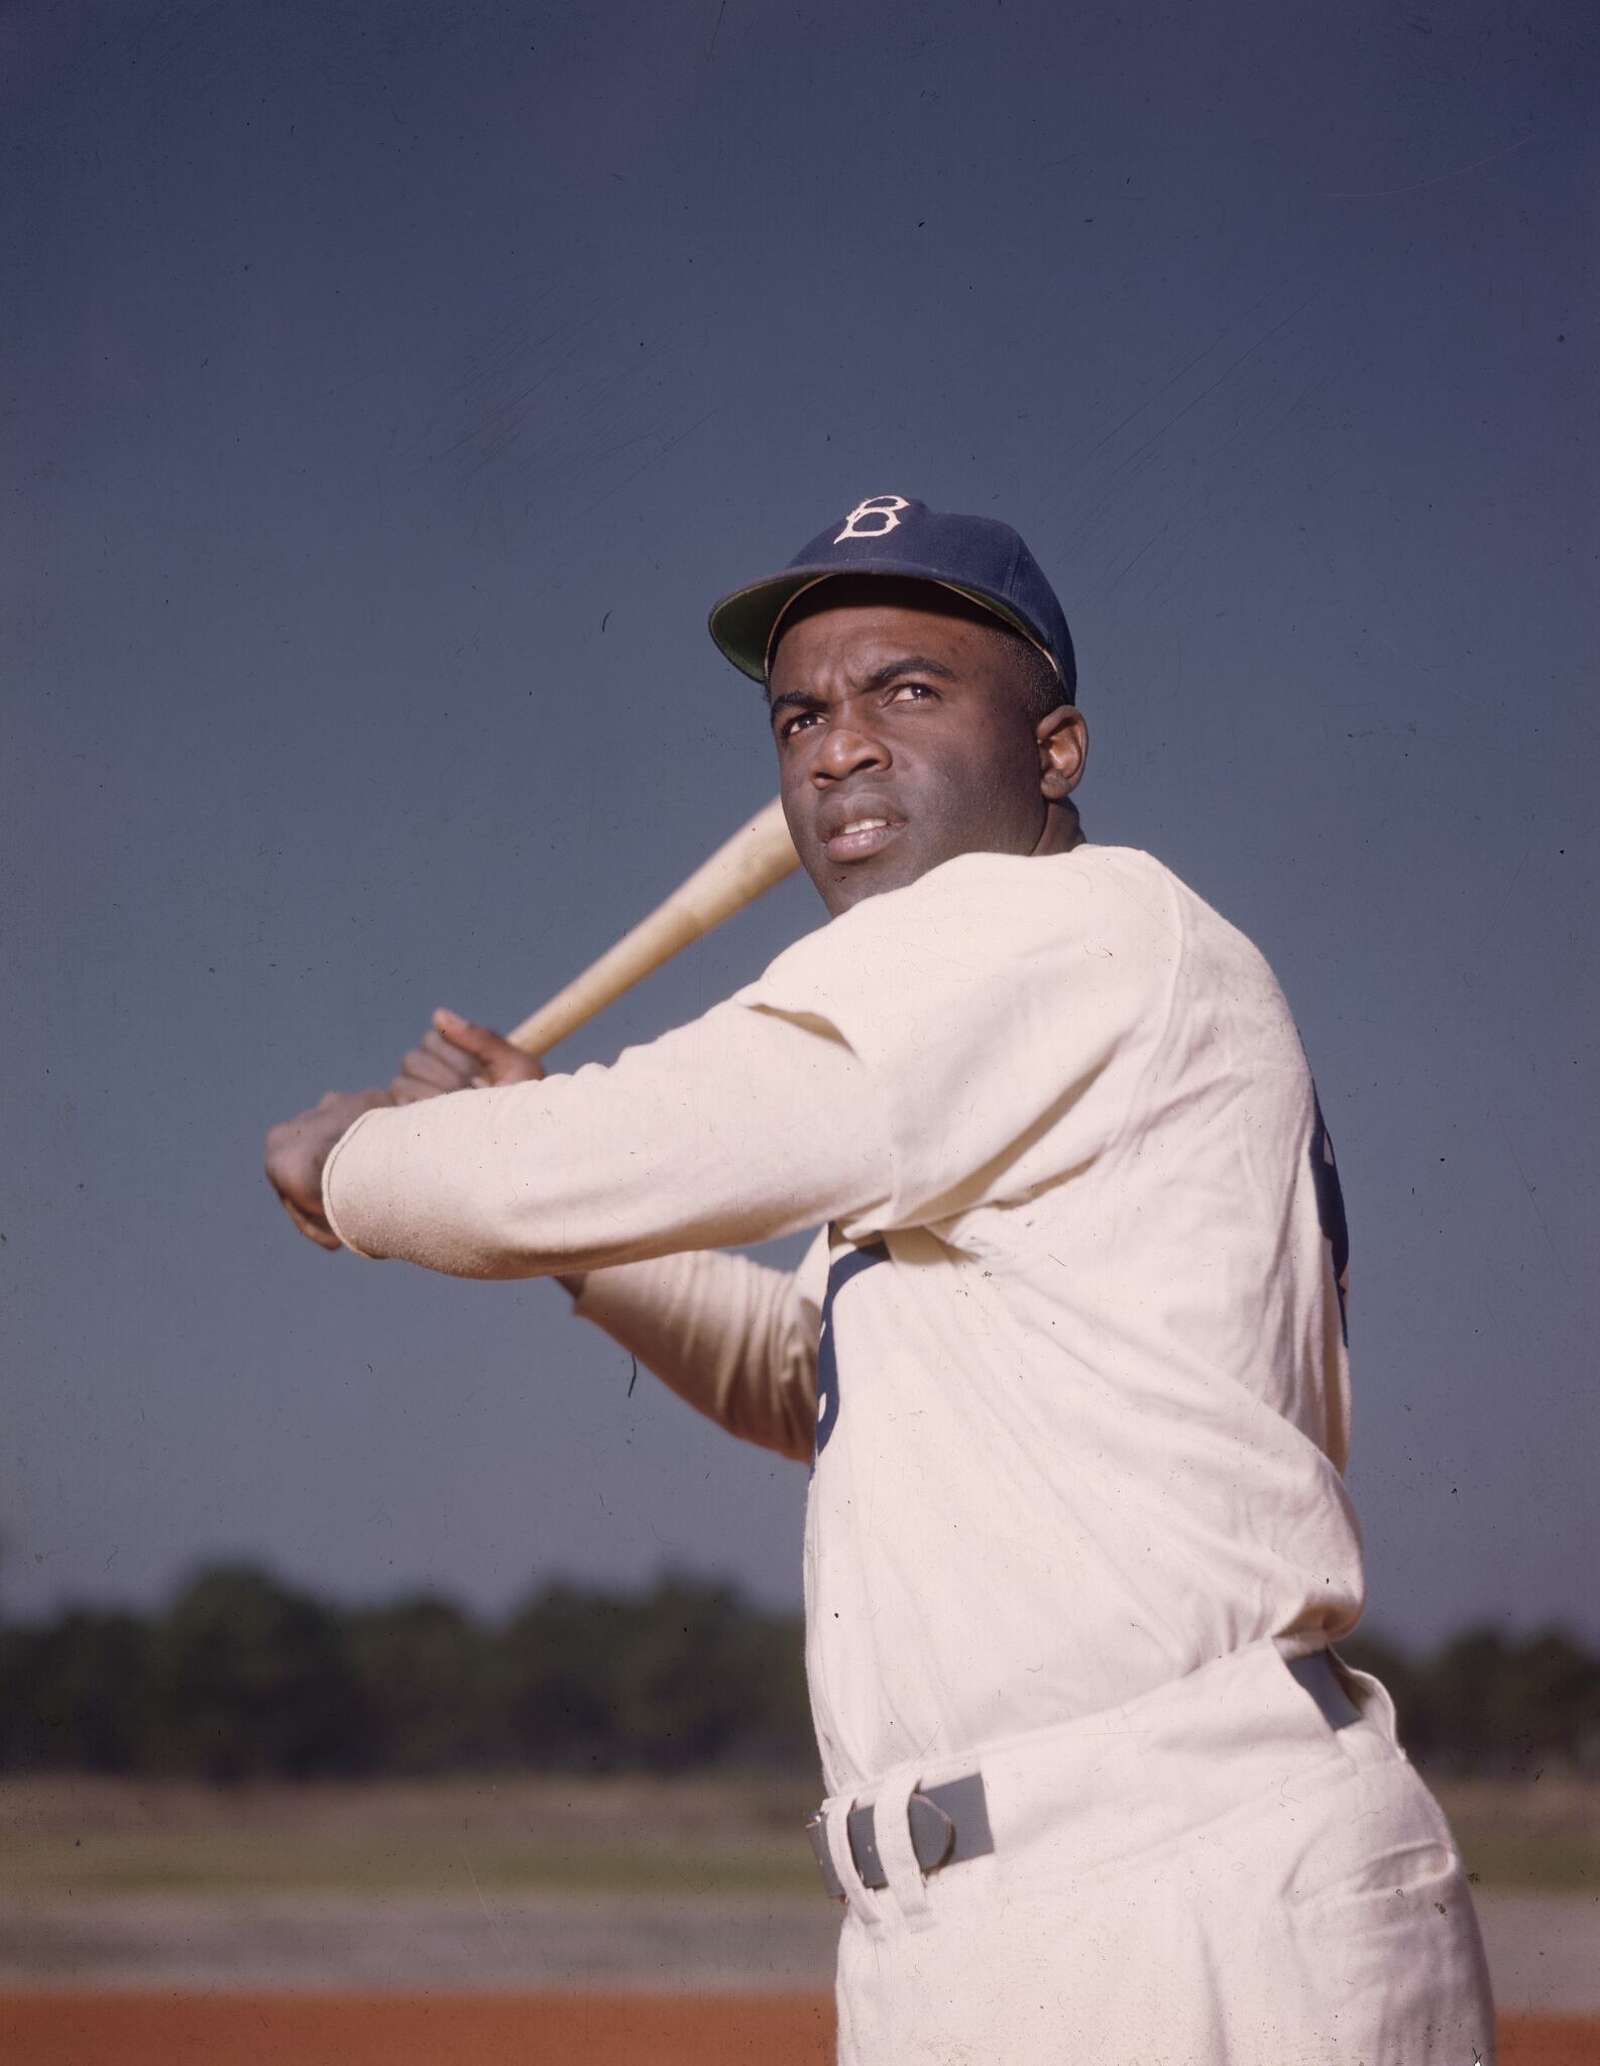 Burlington County Prosecutor's Office - A nice diversion with a milestone  worth noting. Today is the 73rd anniversary of Jackie Robinson breaking  baseball's color barrier. Lucky number of the day is 42.